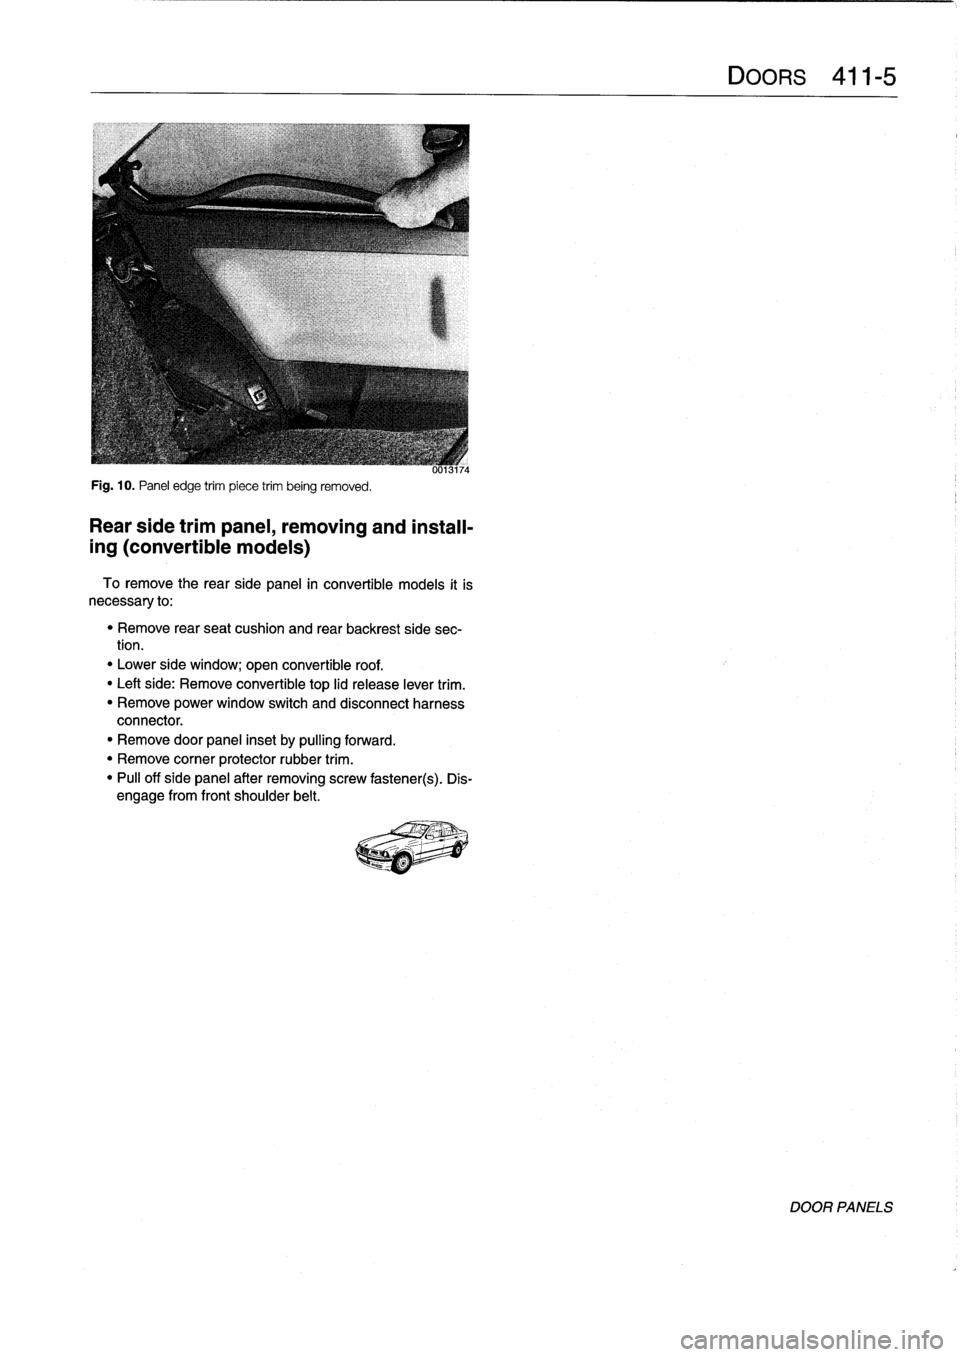 BMW M3 1993 E36 Workshop Manual 
Fig
.
10
.
Panel
edge
trim
piece
trim
being
removed
.

Rear
side
trimpanel,
removing
and
install-

ing
(convertible
models)

To
remove
the
rearside
panel
in
convertible
models
it
is
necessary
to
:

"